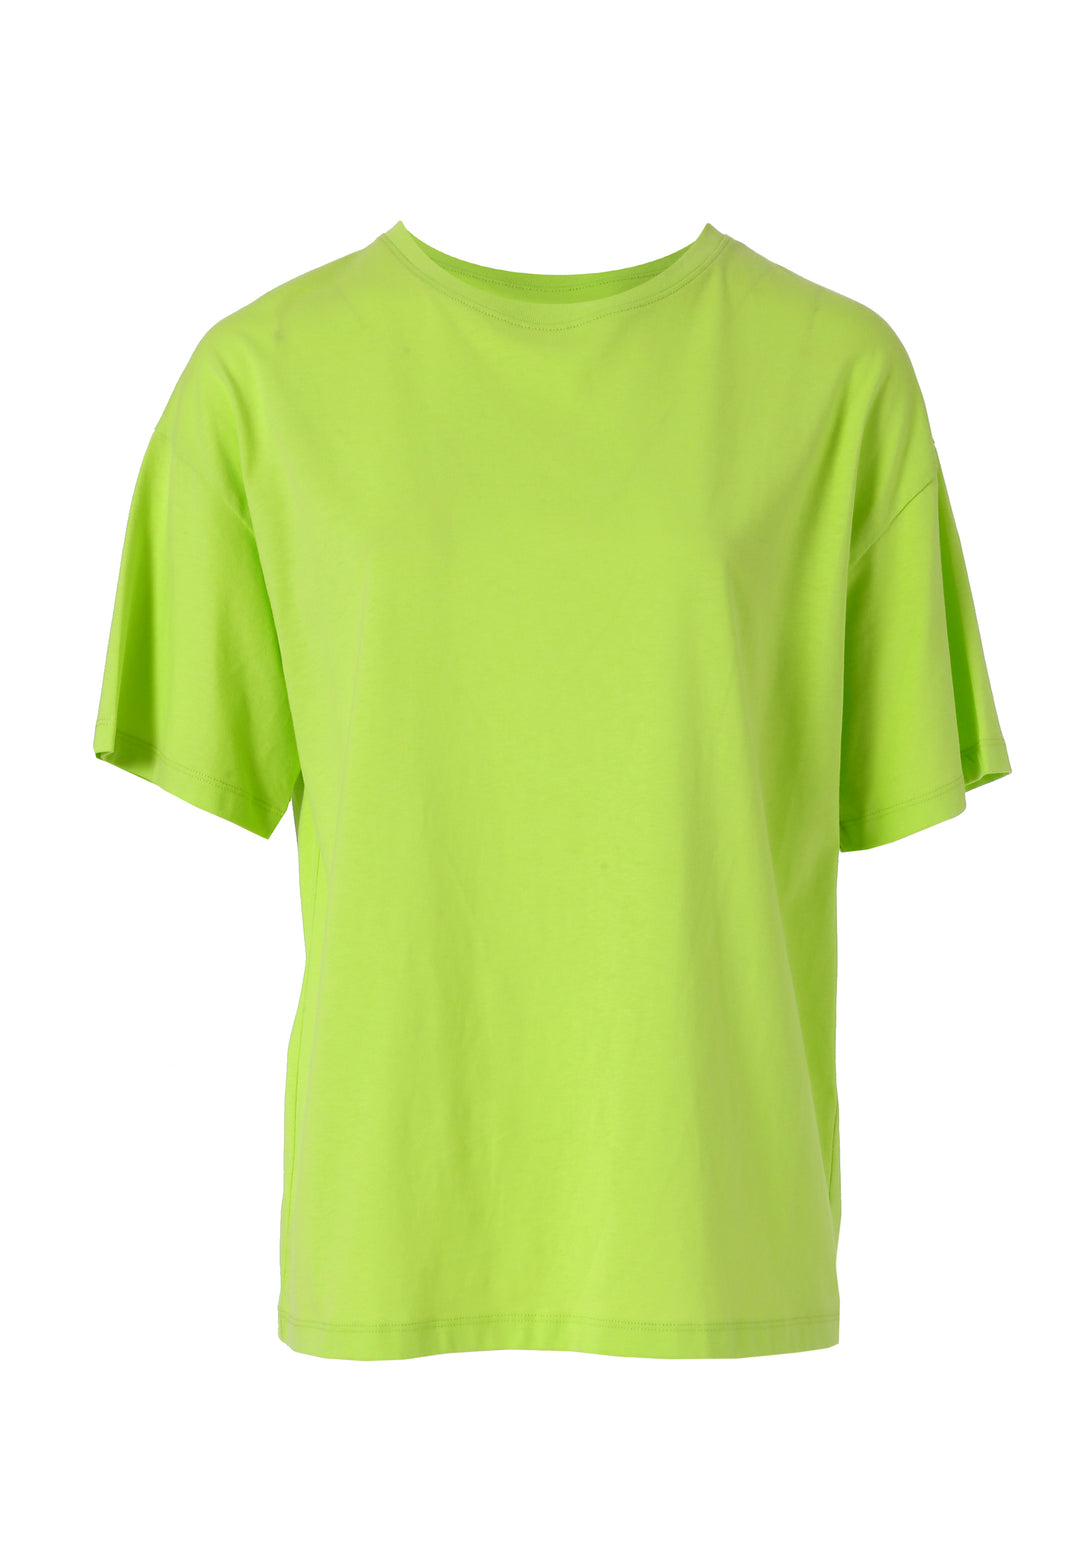 T-shirt ampia in jersey di cotone FP24ST3006J465N5-G48 Fracomina